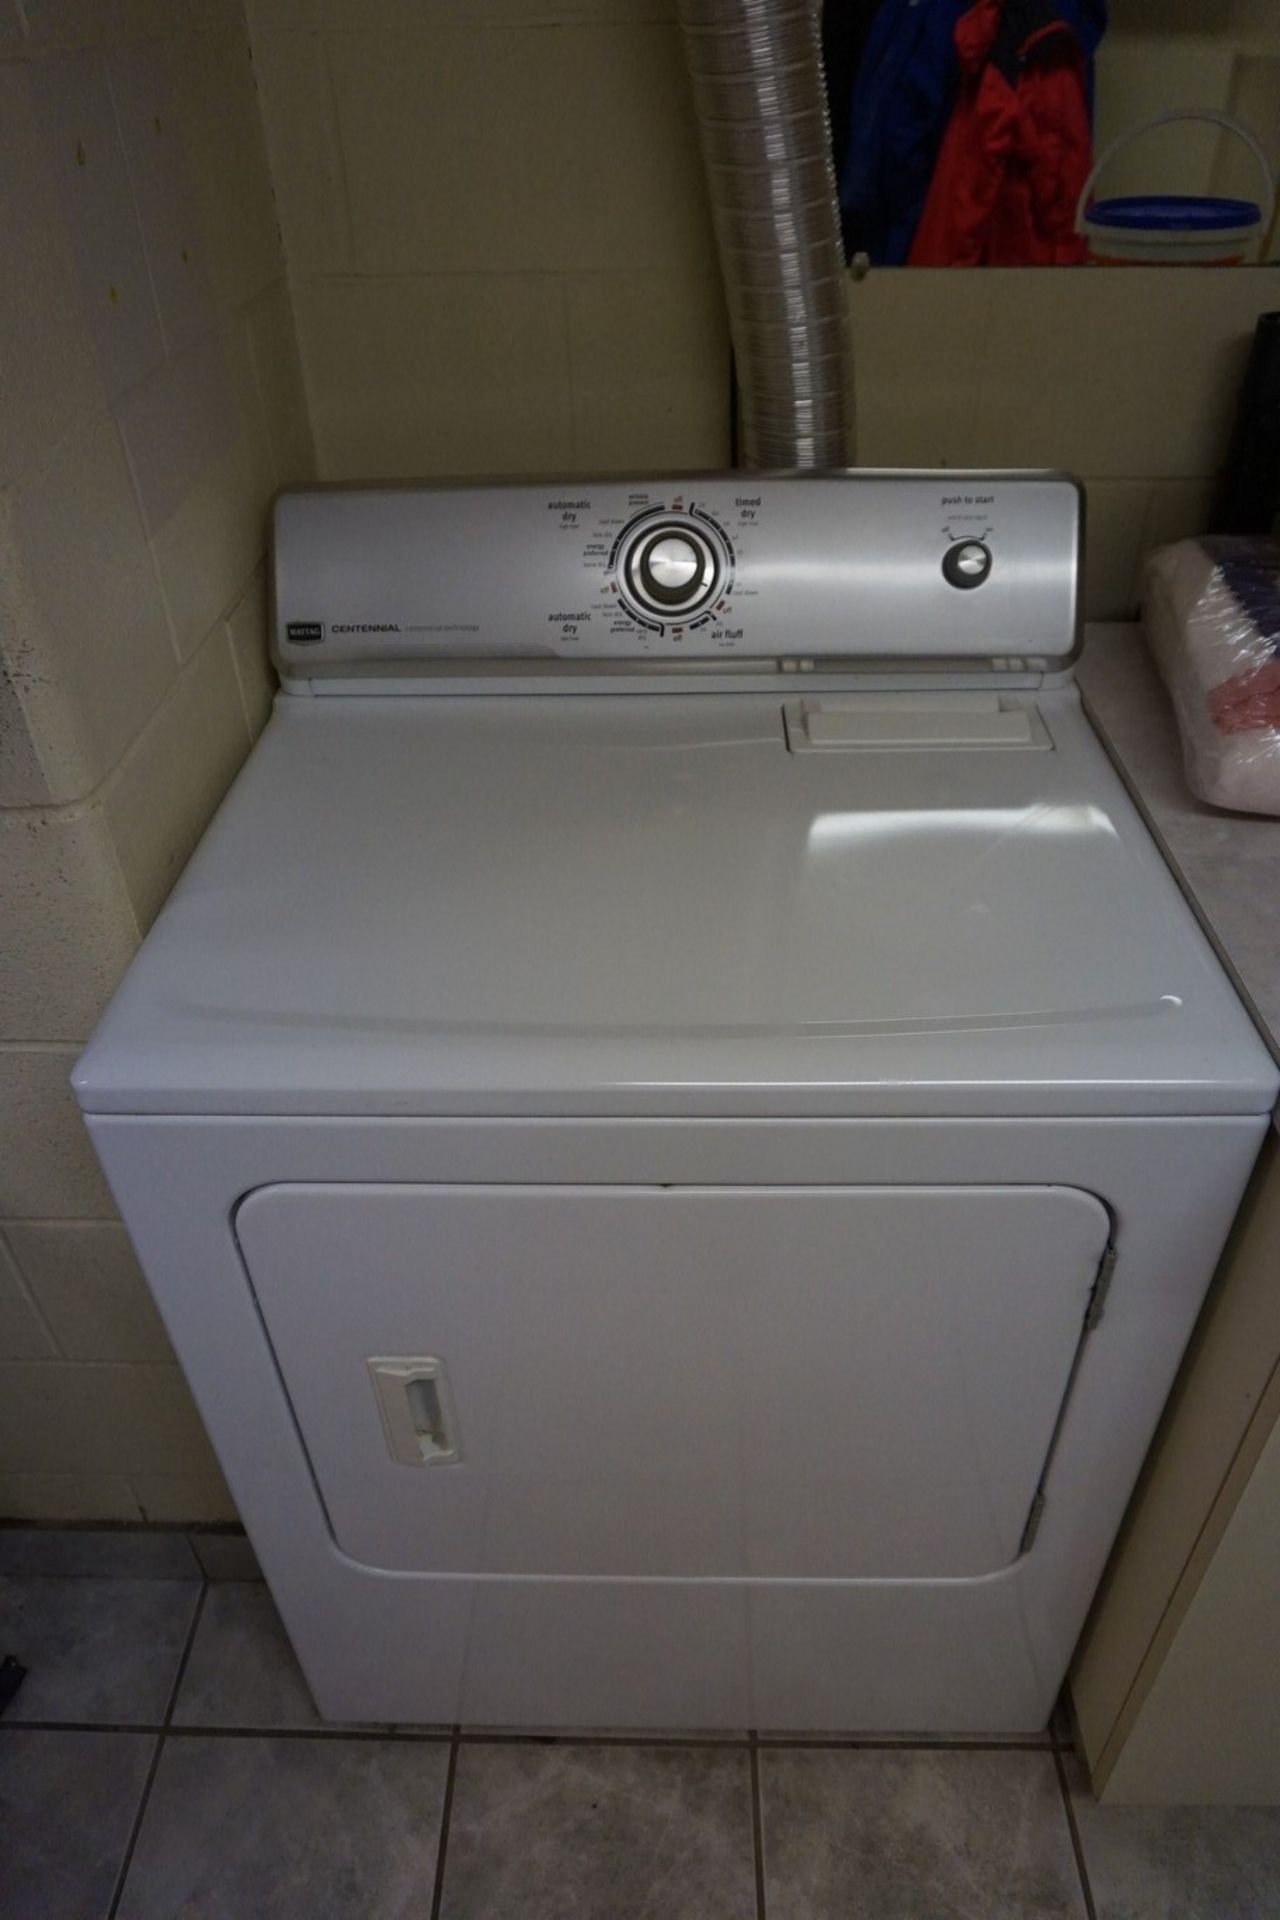 Whirlpool Duet 4.0 cu. ft Washer with Maytag Centennial Dryer - Image 2 of 2